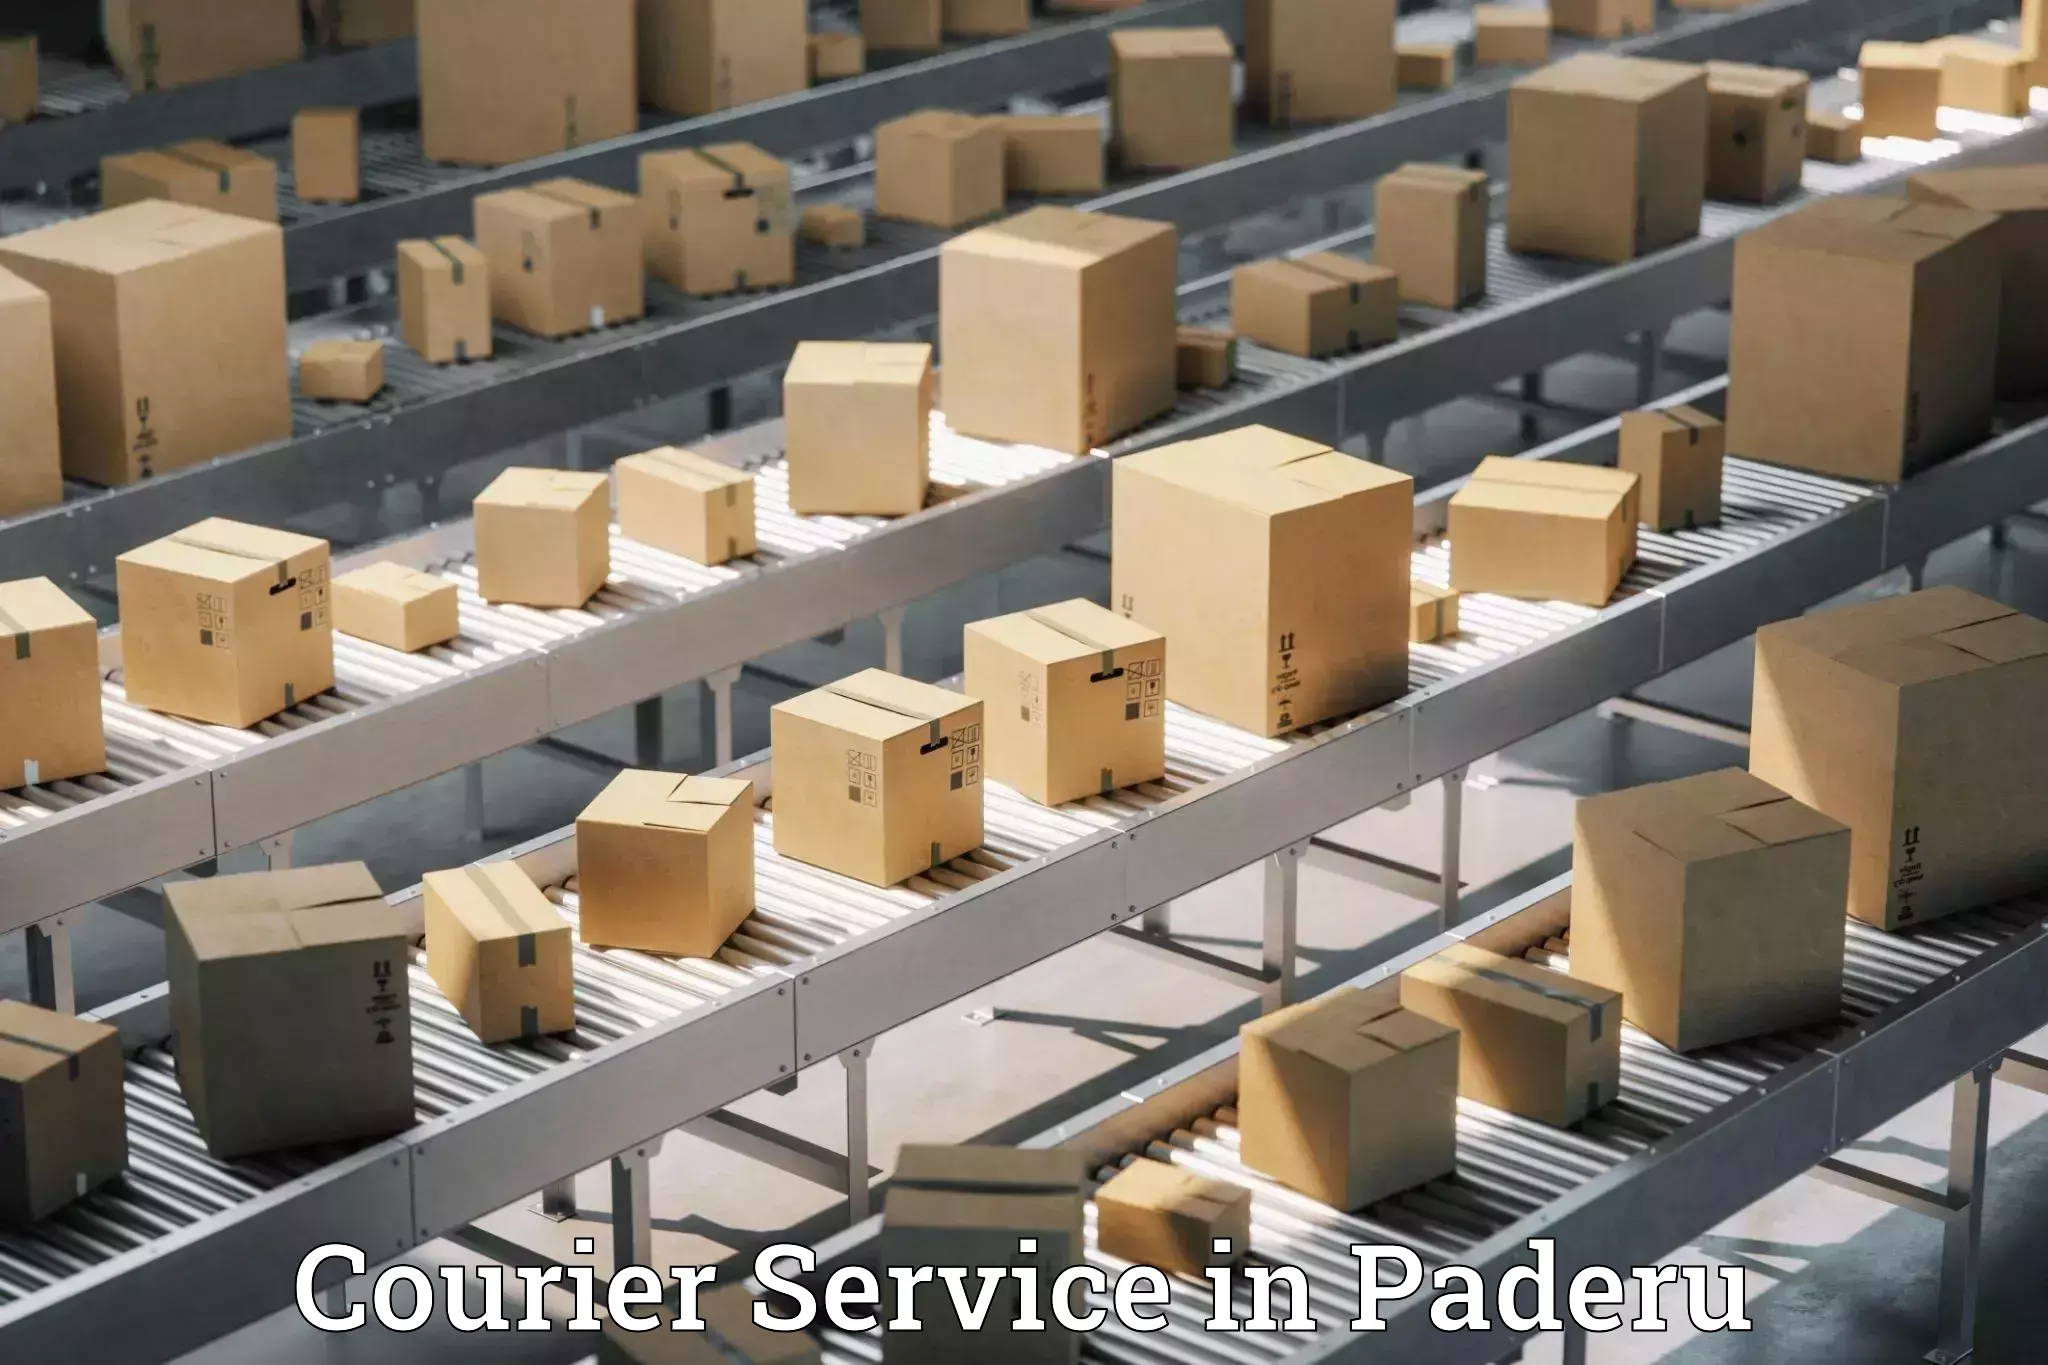 24-hour courier service in Paderu